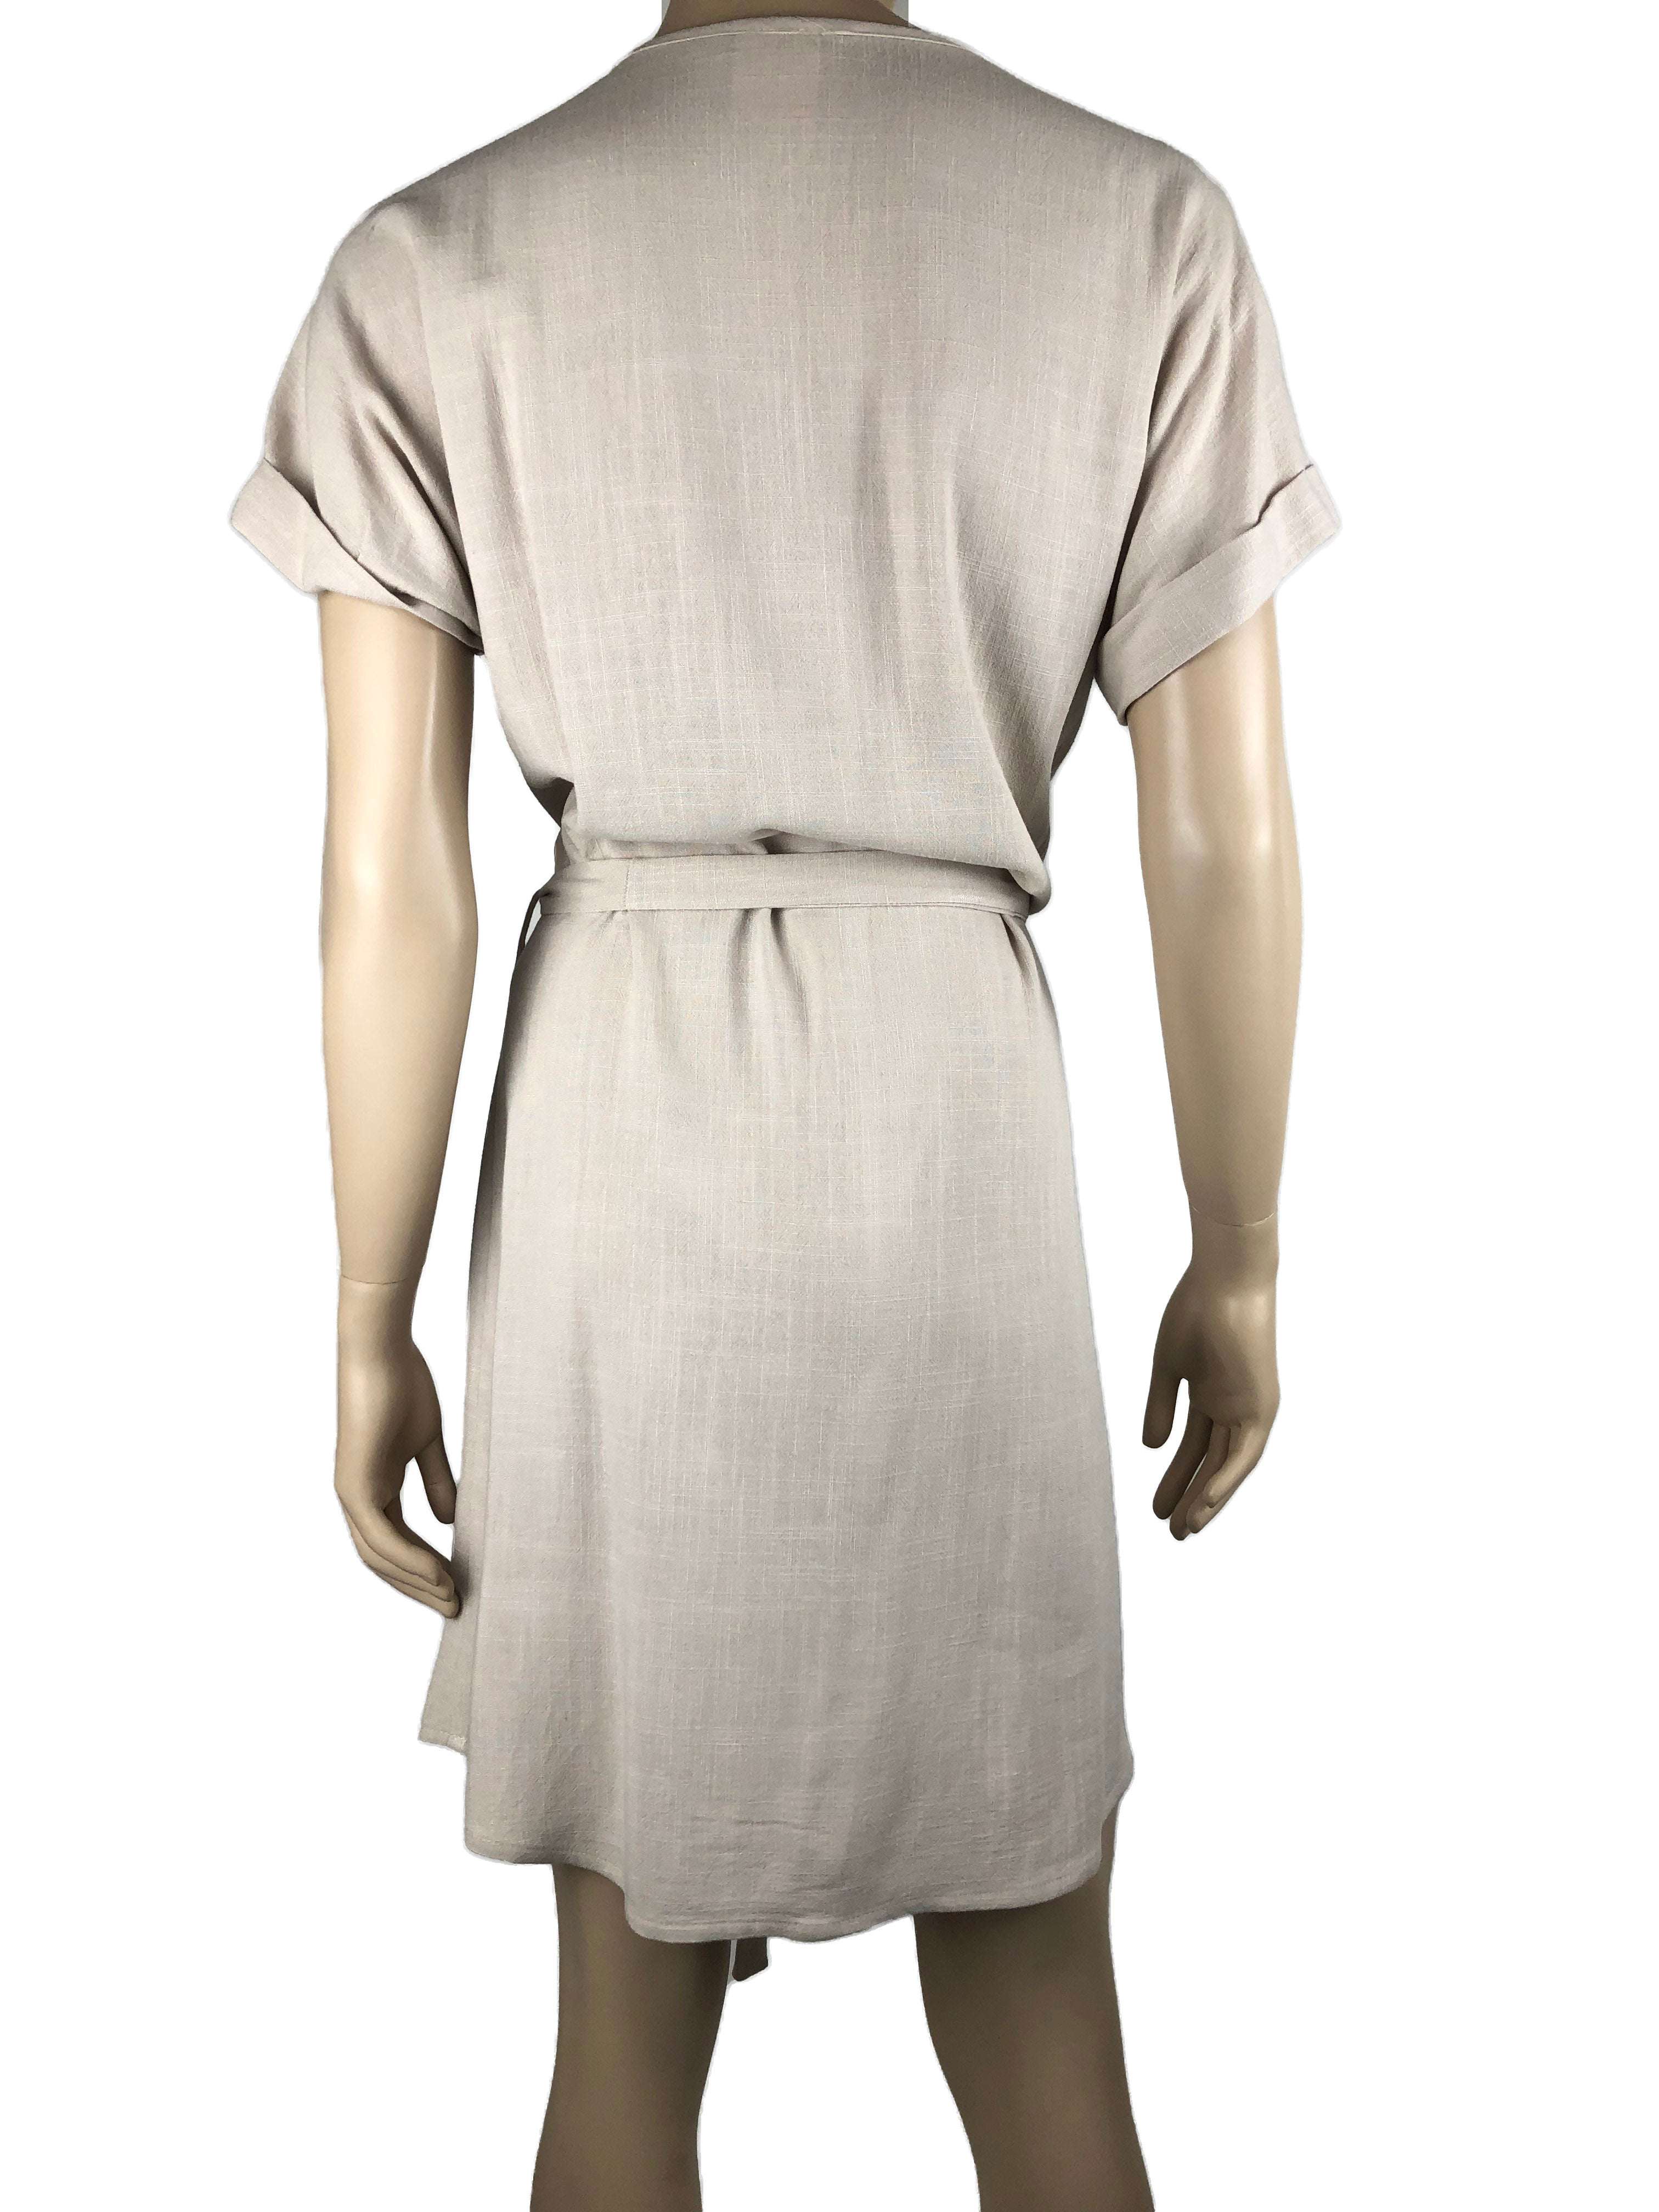 Women's Dress On Sale Canada Natural Color Shirt Dress on Sale now 50 off Made in Canada - Yvonne Marie - Yvonne Marie